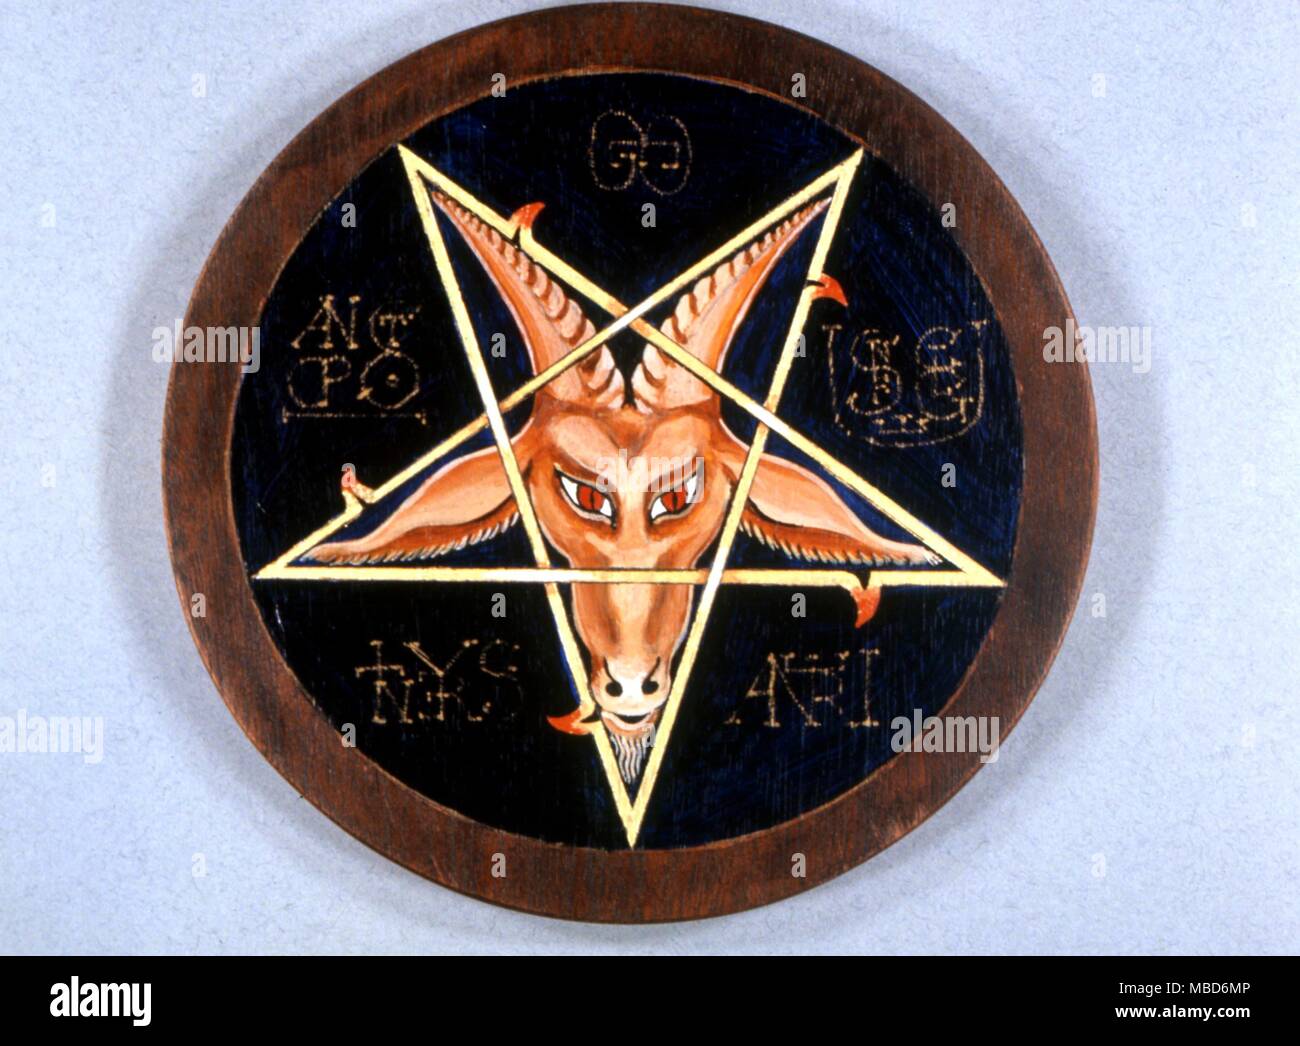 MAGICAL ALPHABETS - head of the Sabbatic goat, after Eliphas Levi, set in pentagram. This talisman is designed to take five sigillisations, in the form of magical alphabets. Made by Graham Fenn-Edwards. Stock Photo